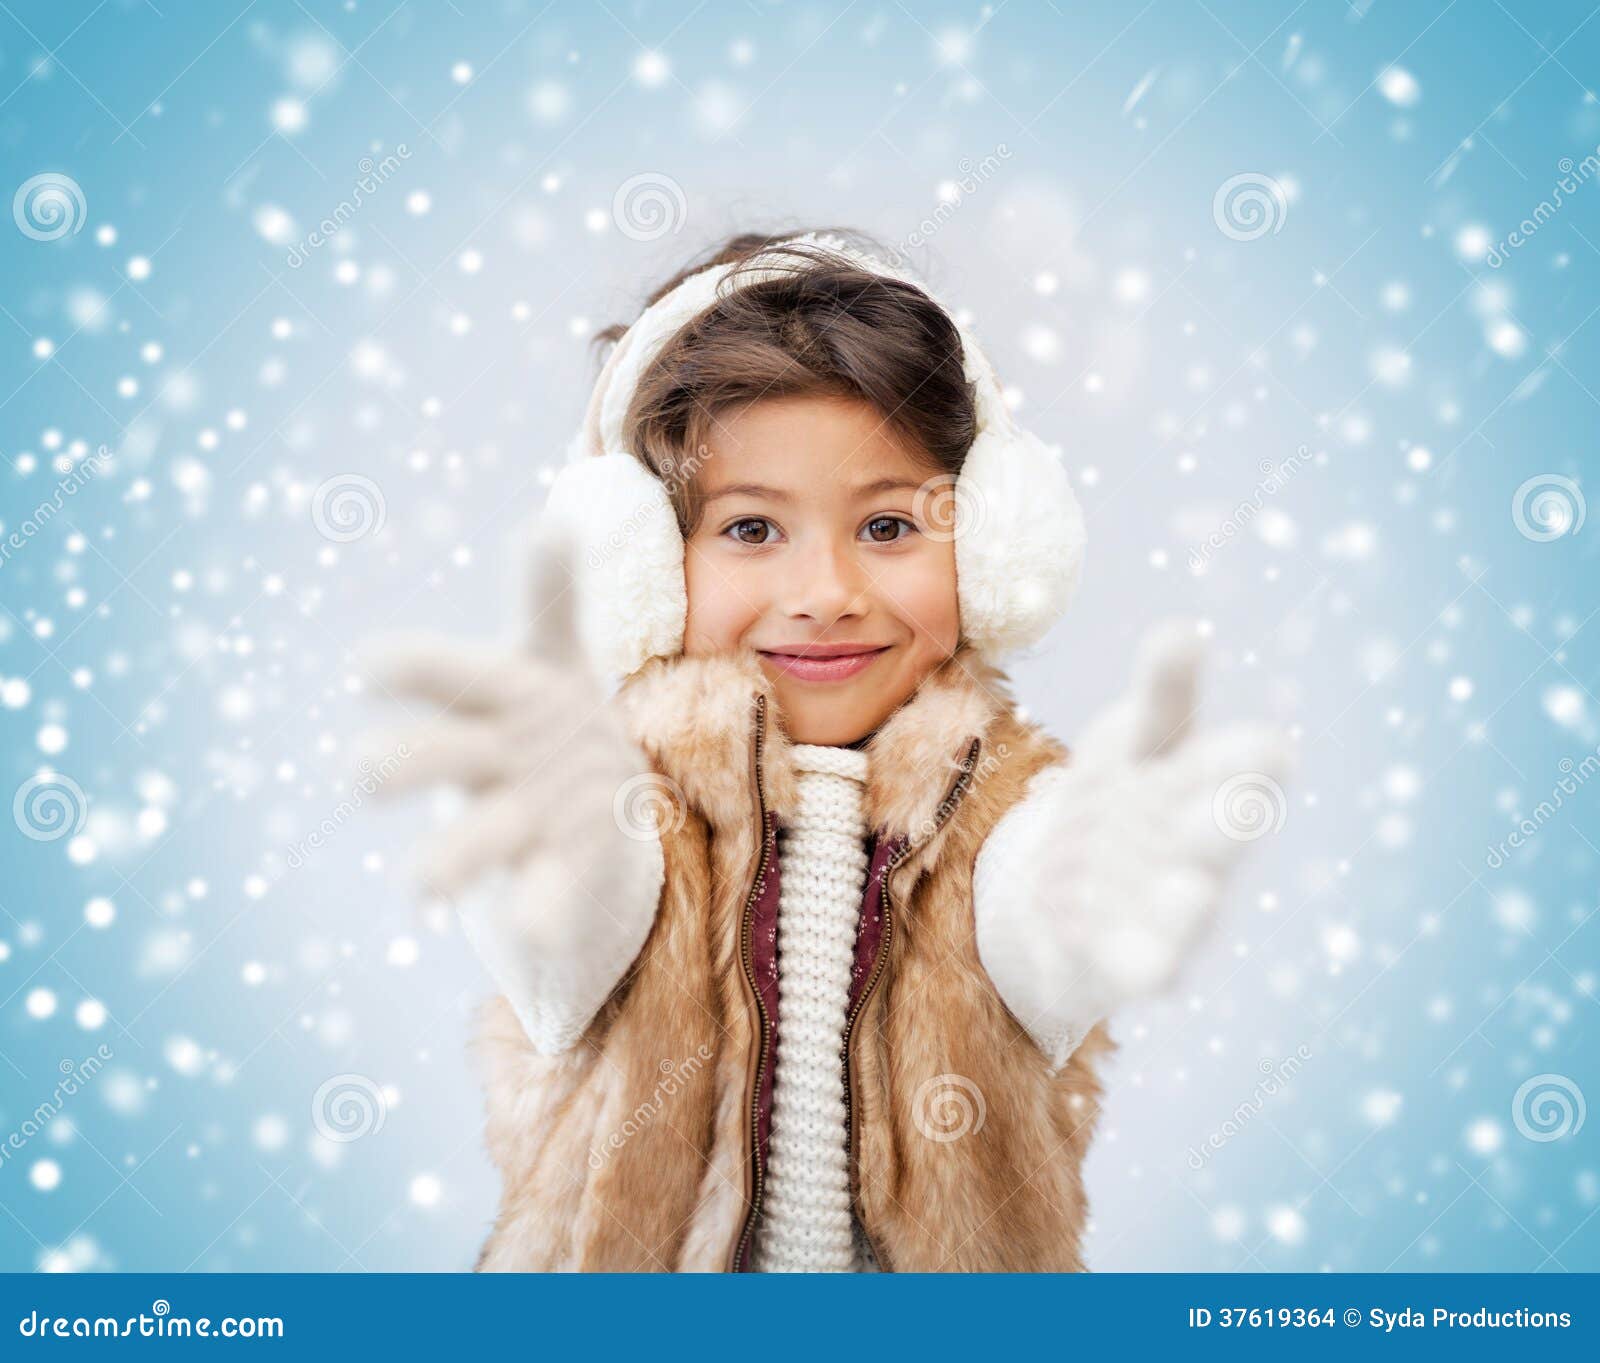 Happy Littl Girl in Winter Clothes Stock Photo - Image of child, beauty ...